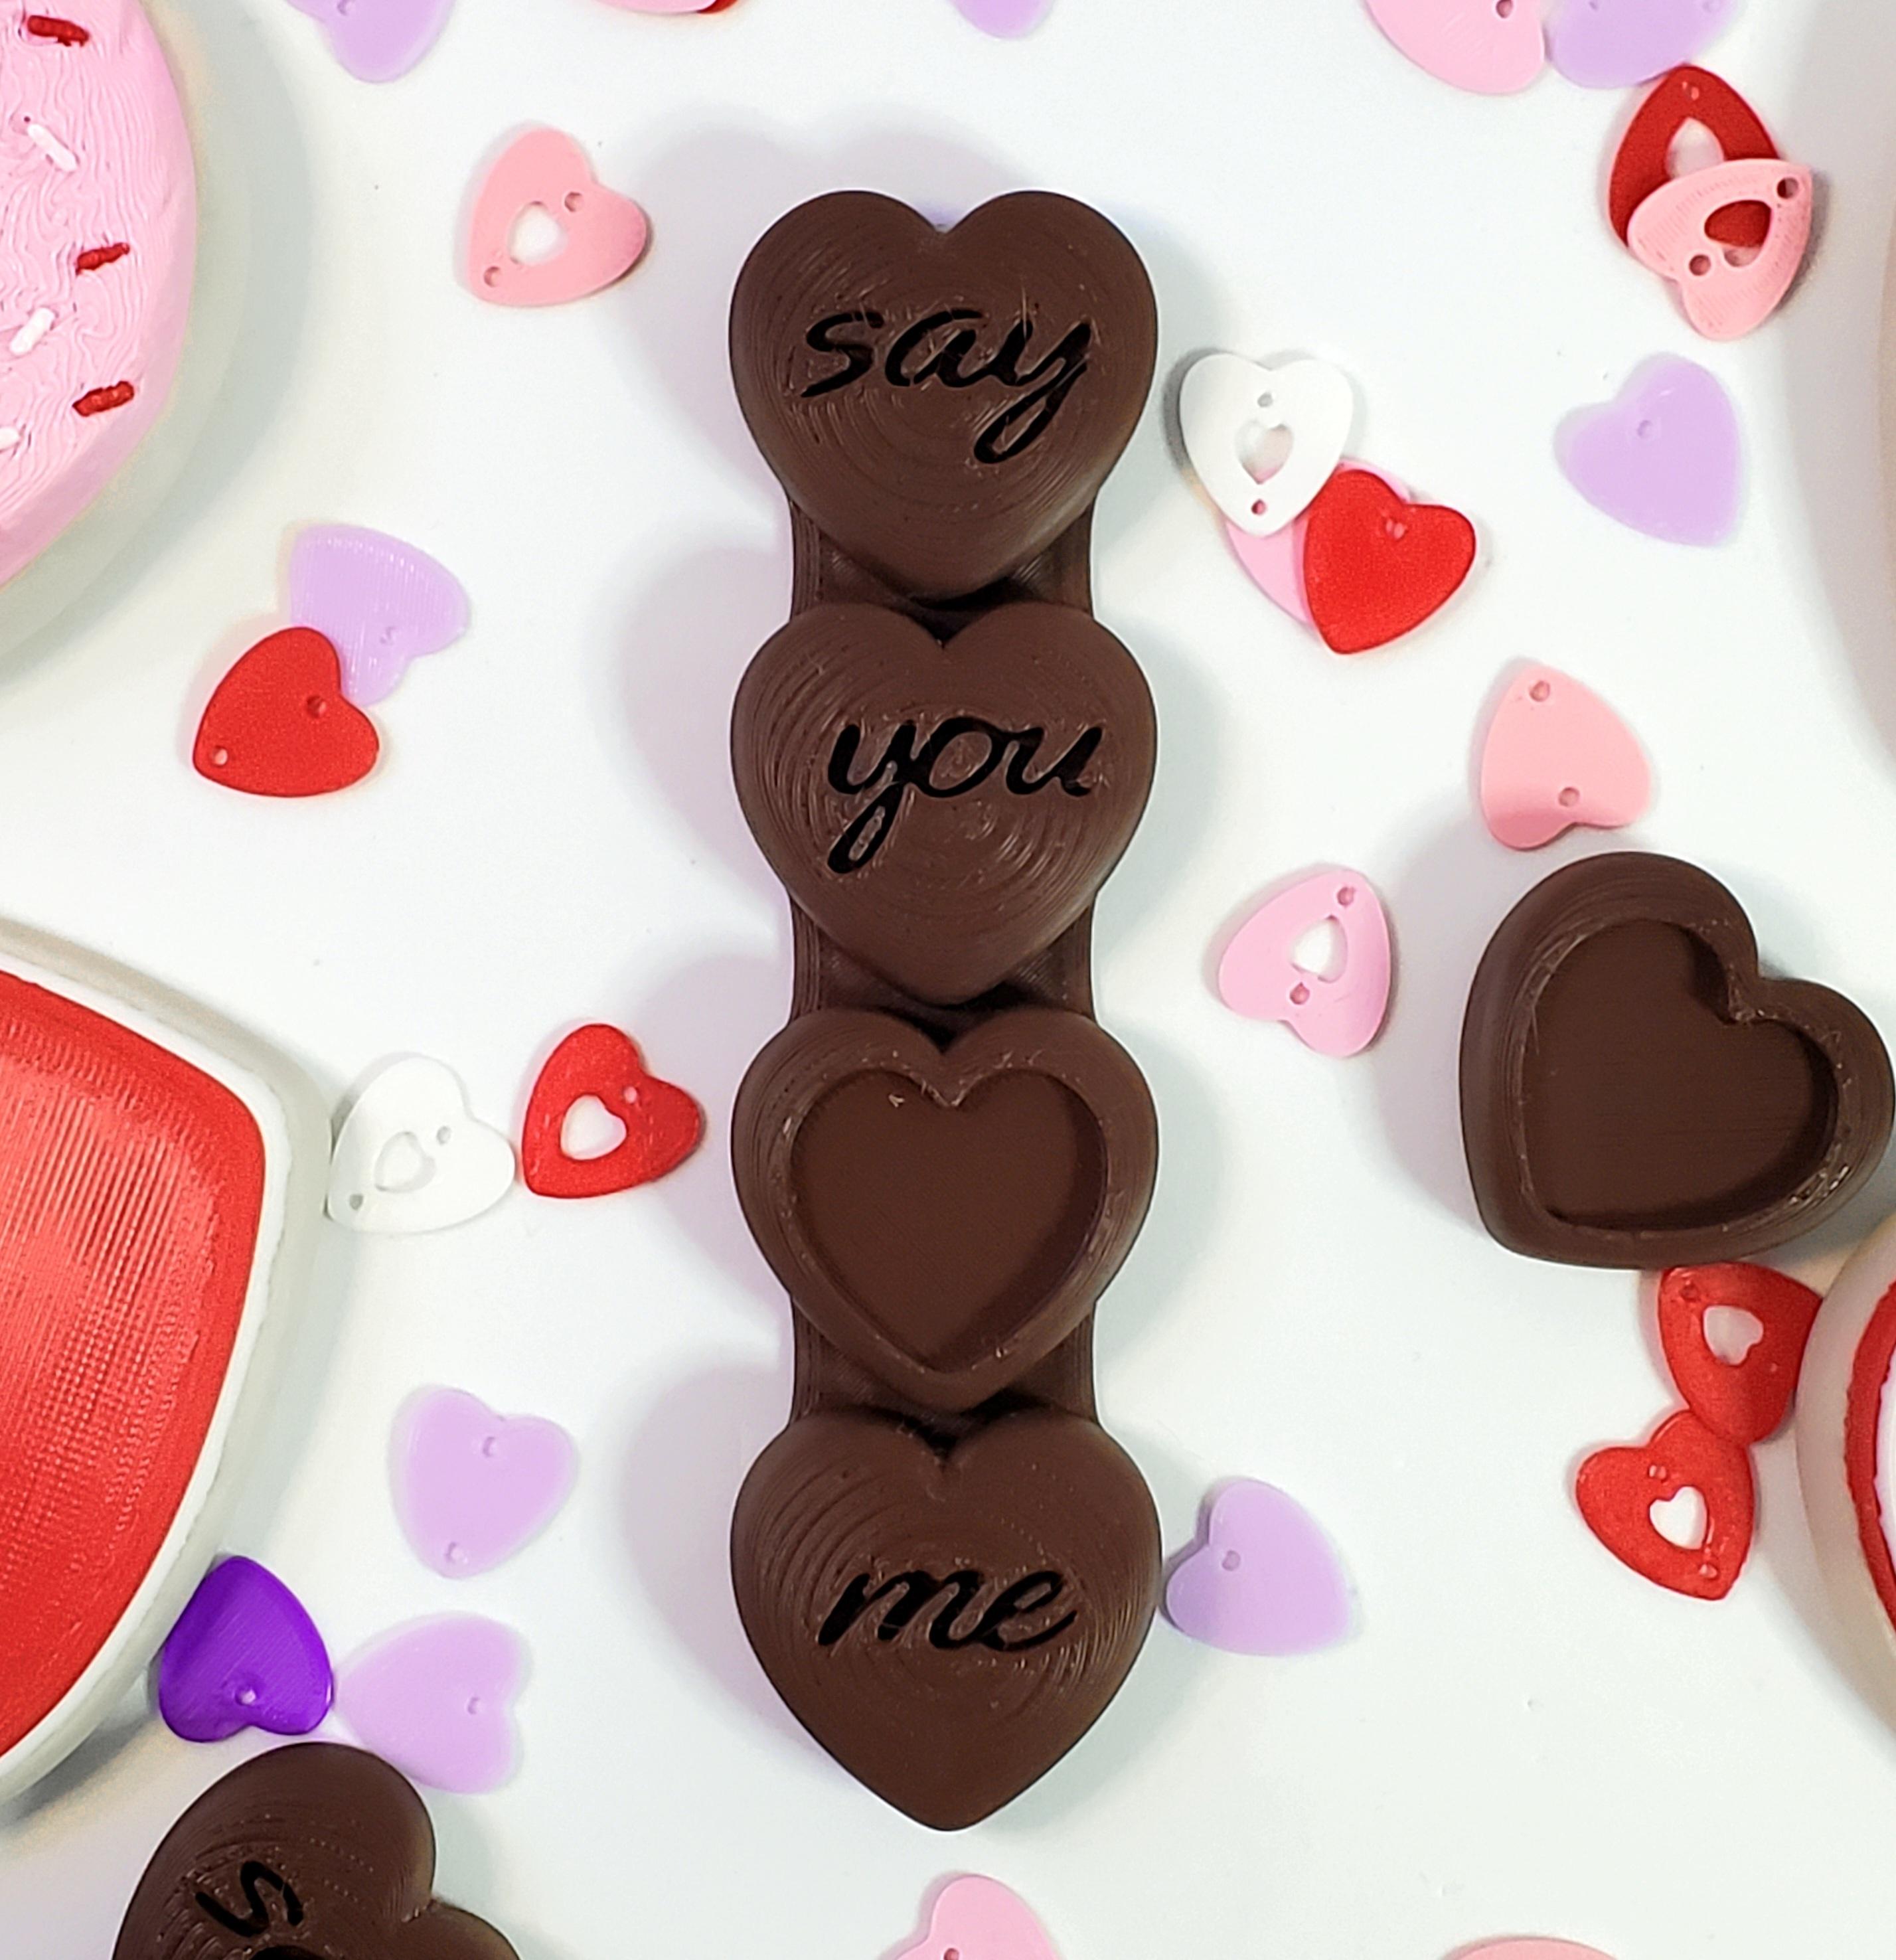 'Say You Love Me' Heart-Shape Chocolate Candy Bar for Valentine's Day :: Delicious Desserts! 3d model